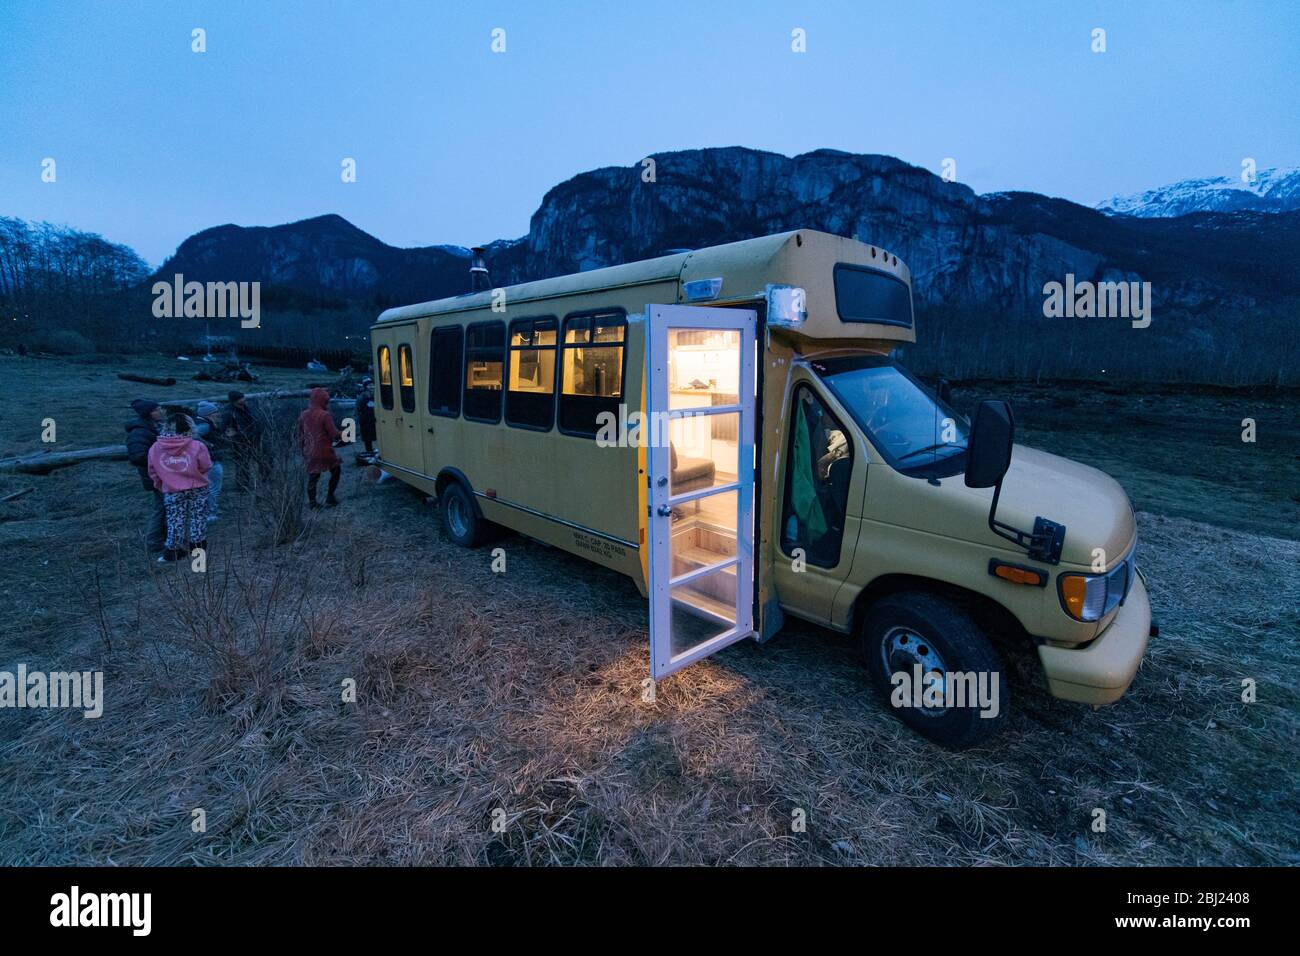 Campervan in a rocky landscape at dusk with the light on inside and the door open, group of people standing towards the rear. Stock Photo